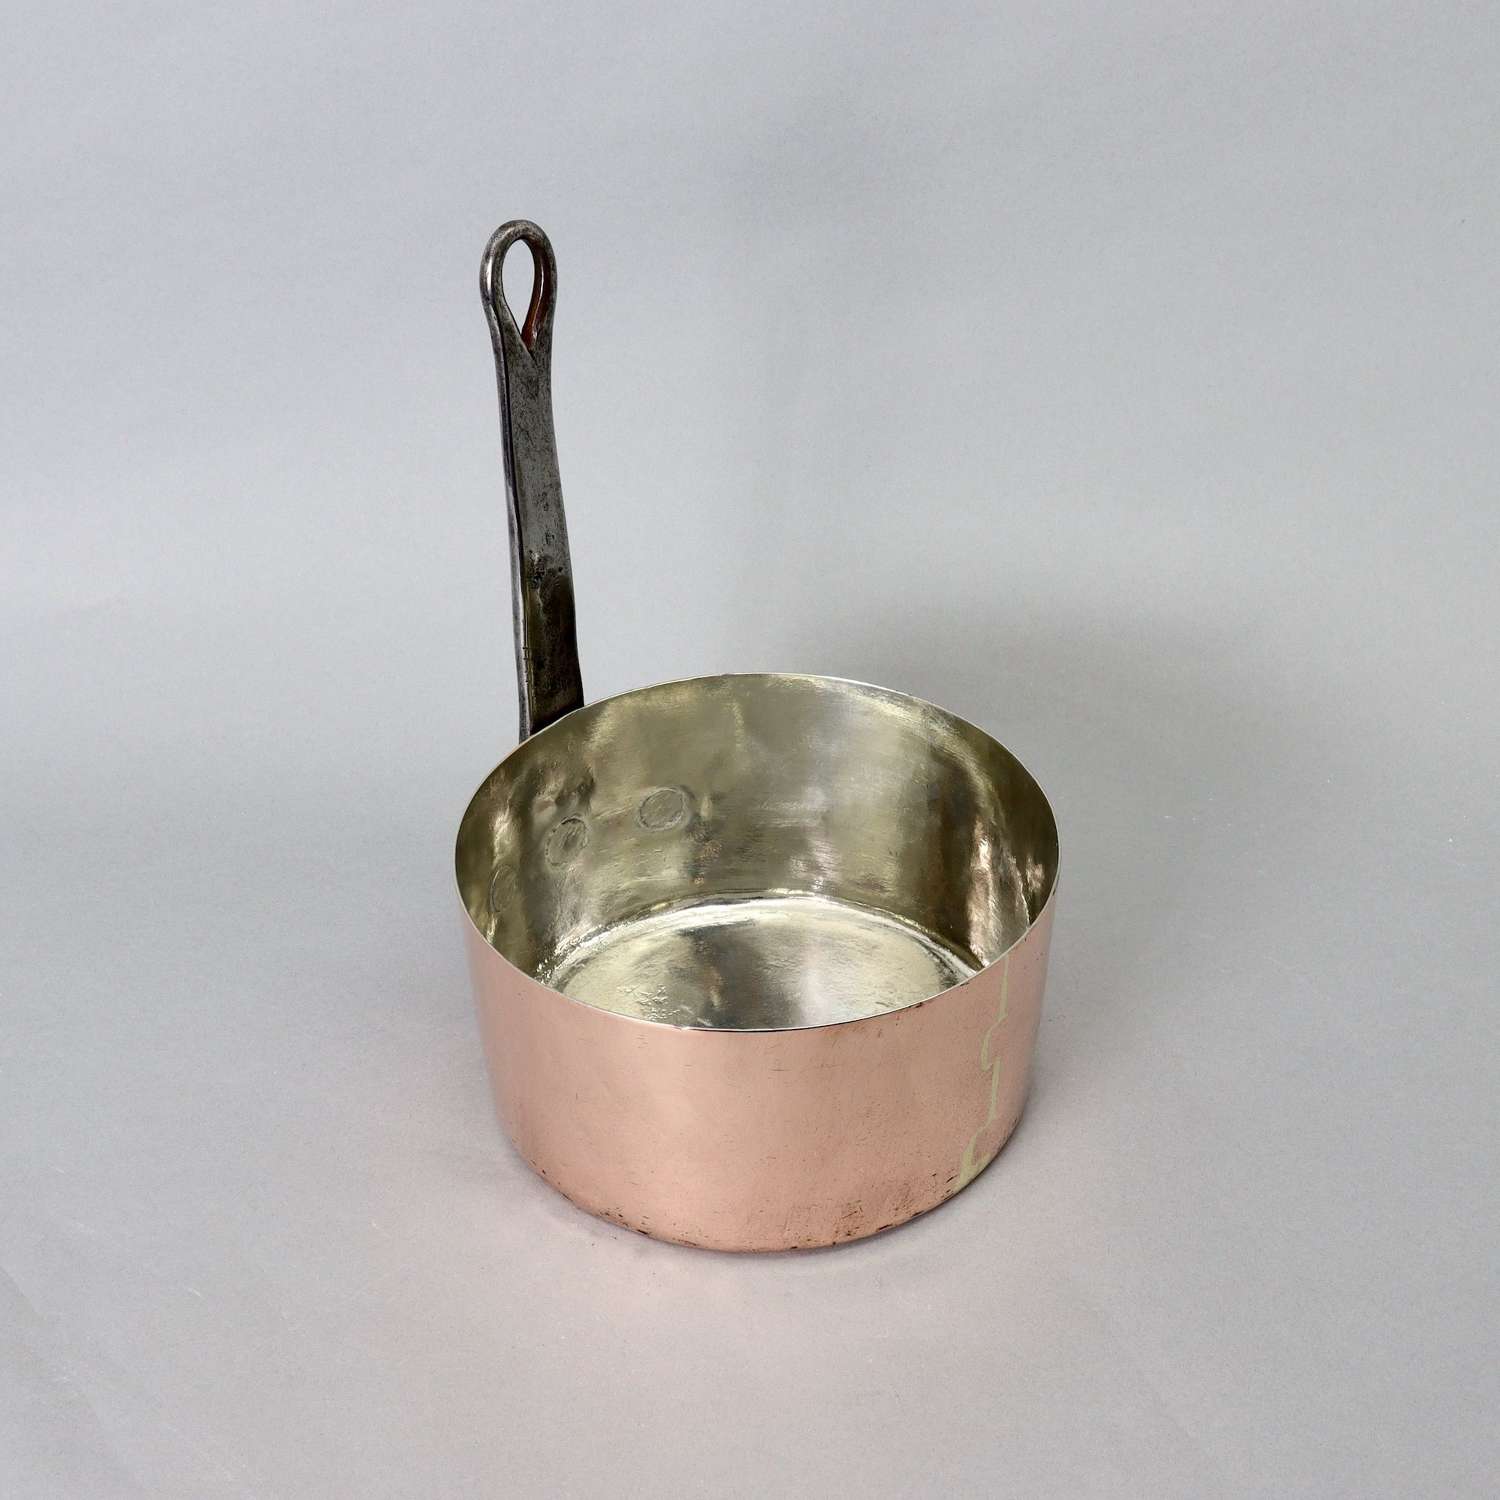 Unusual Copper Pan with Vertical Handle